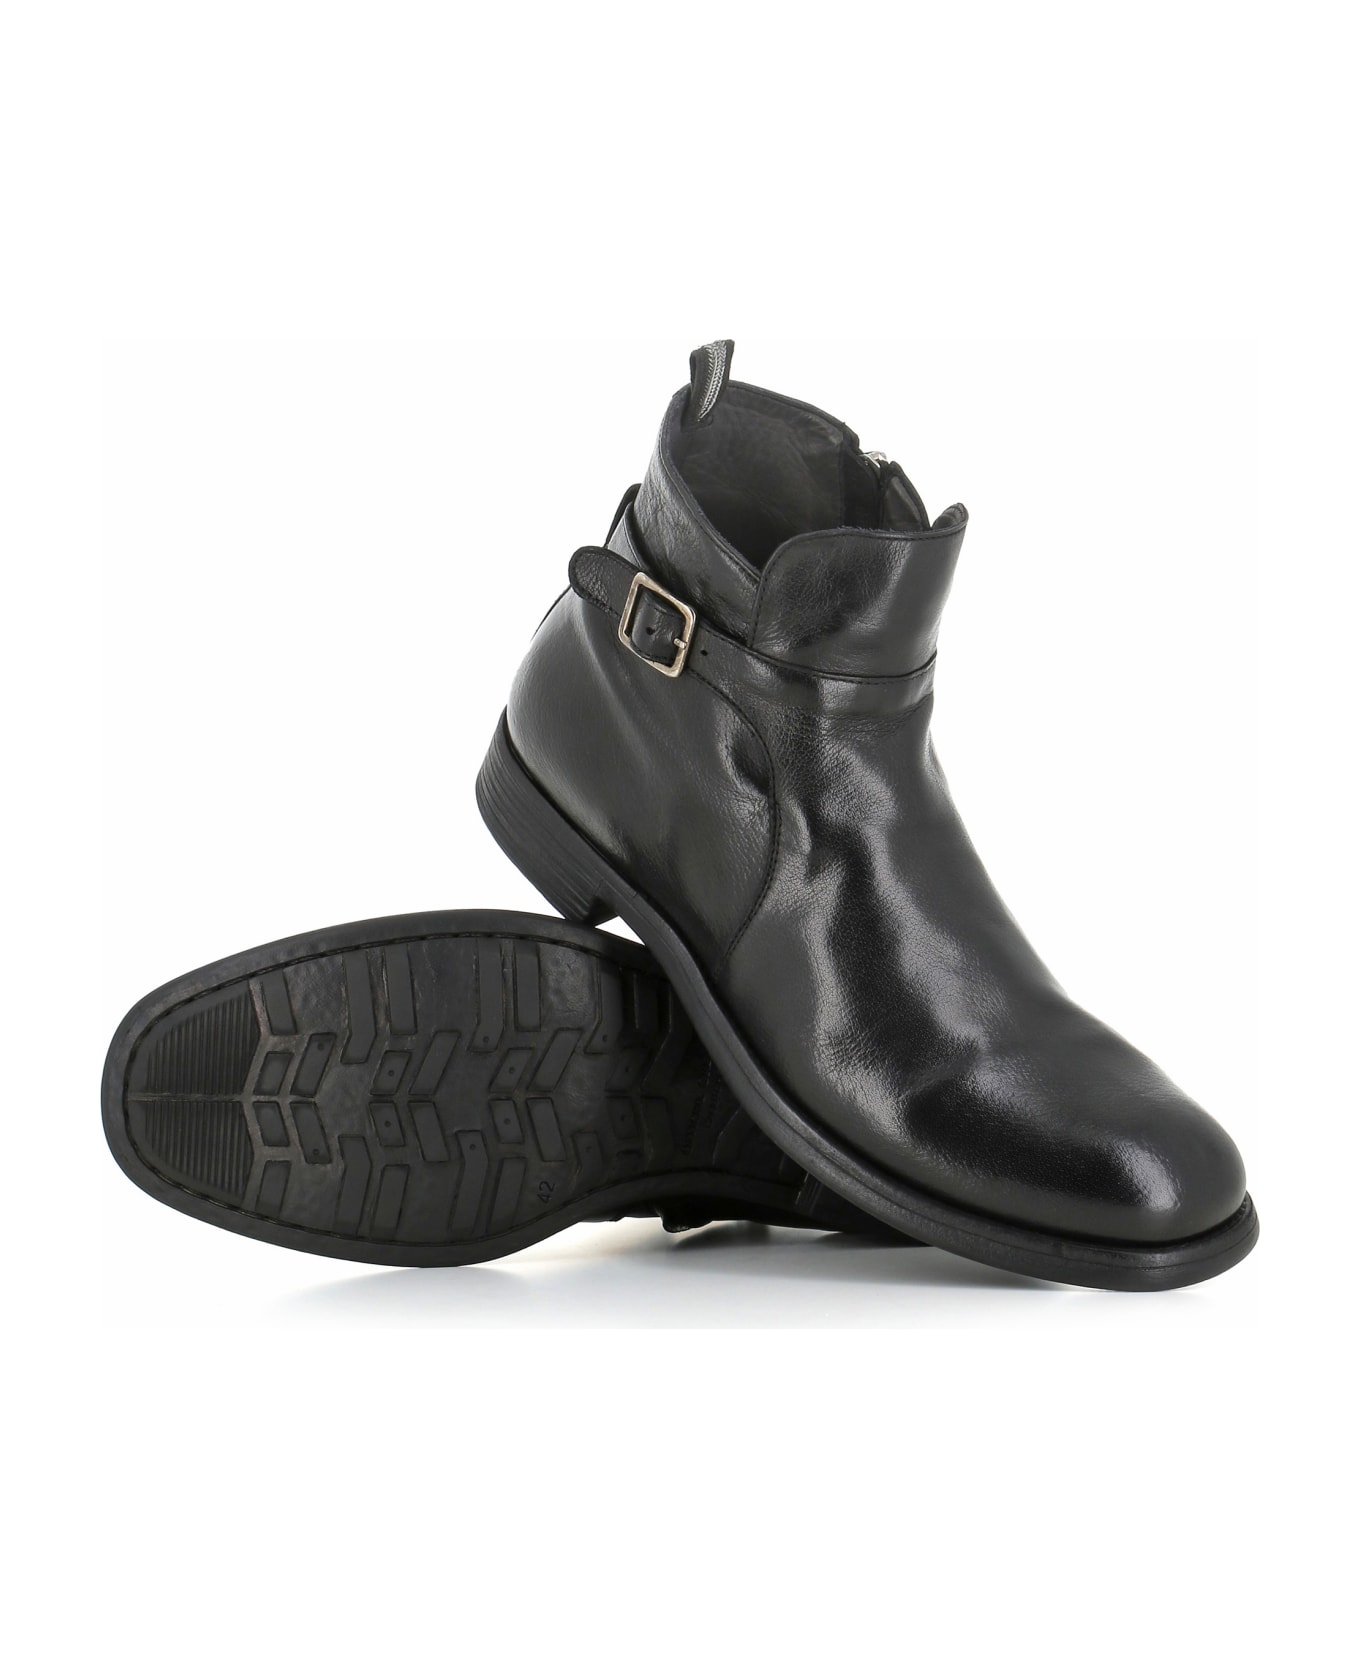 Officine Creative Ankle Boot Chronicle/068 - Black